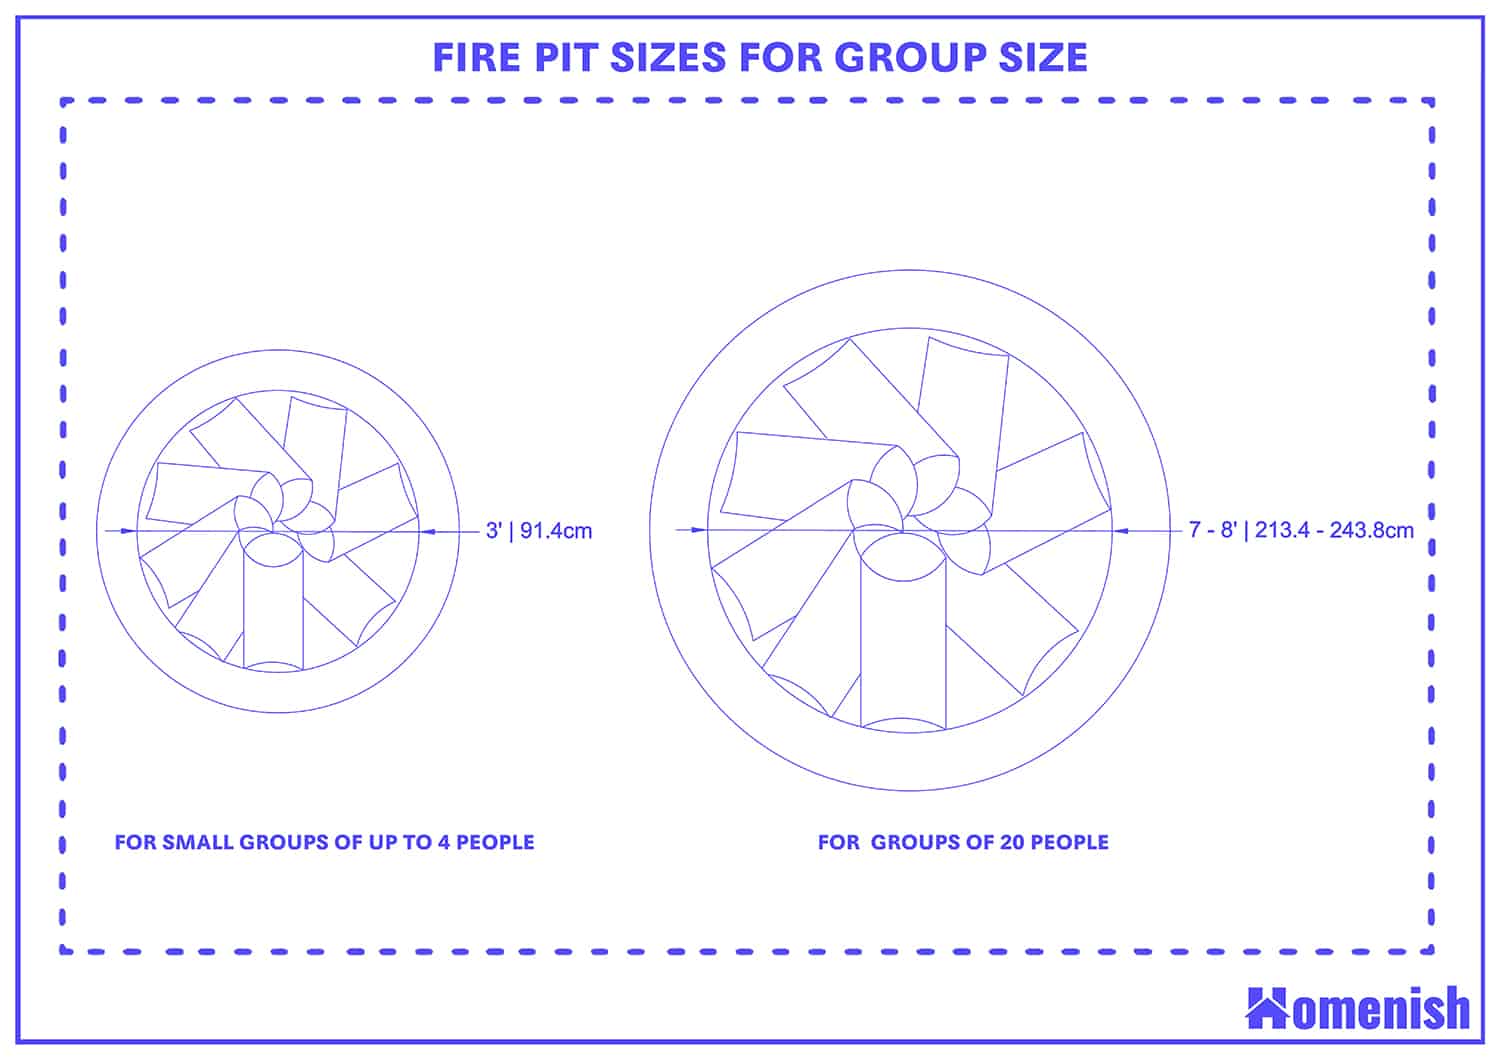 Fire pit sizes for group size